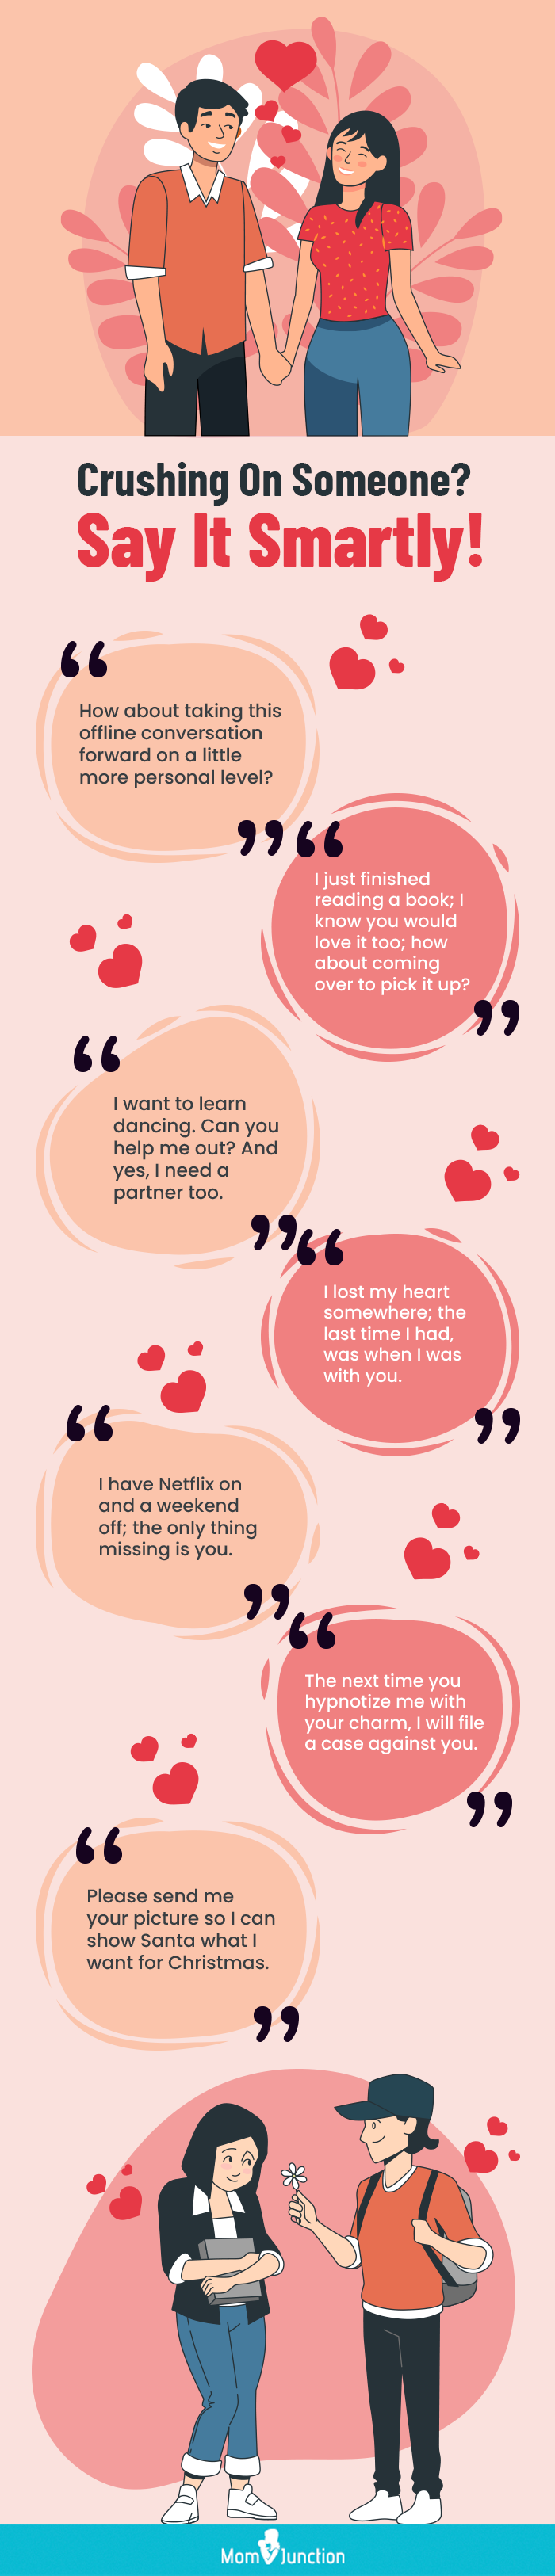 crushing on someone say it smartly [infographic]